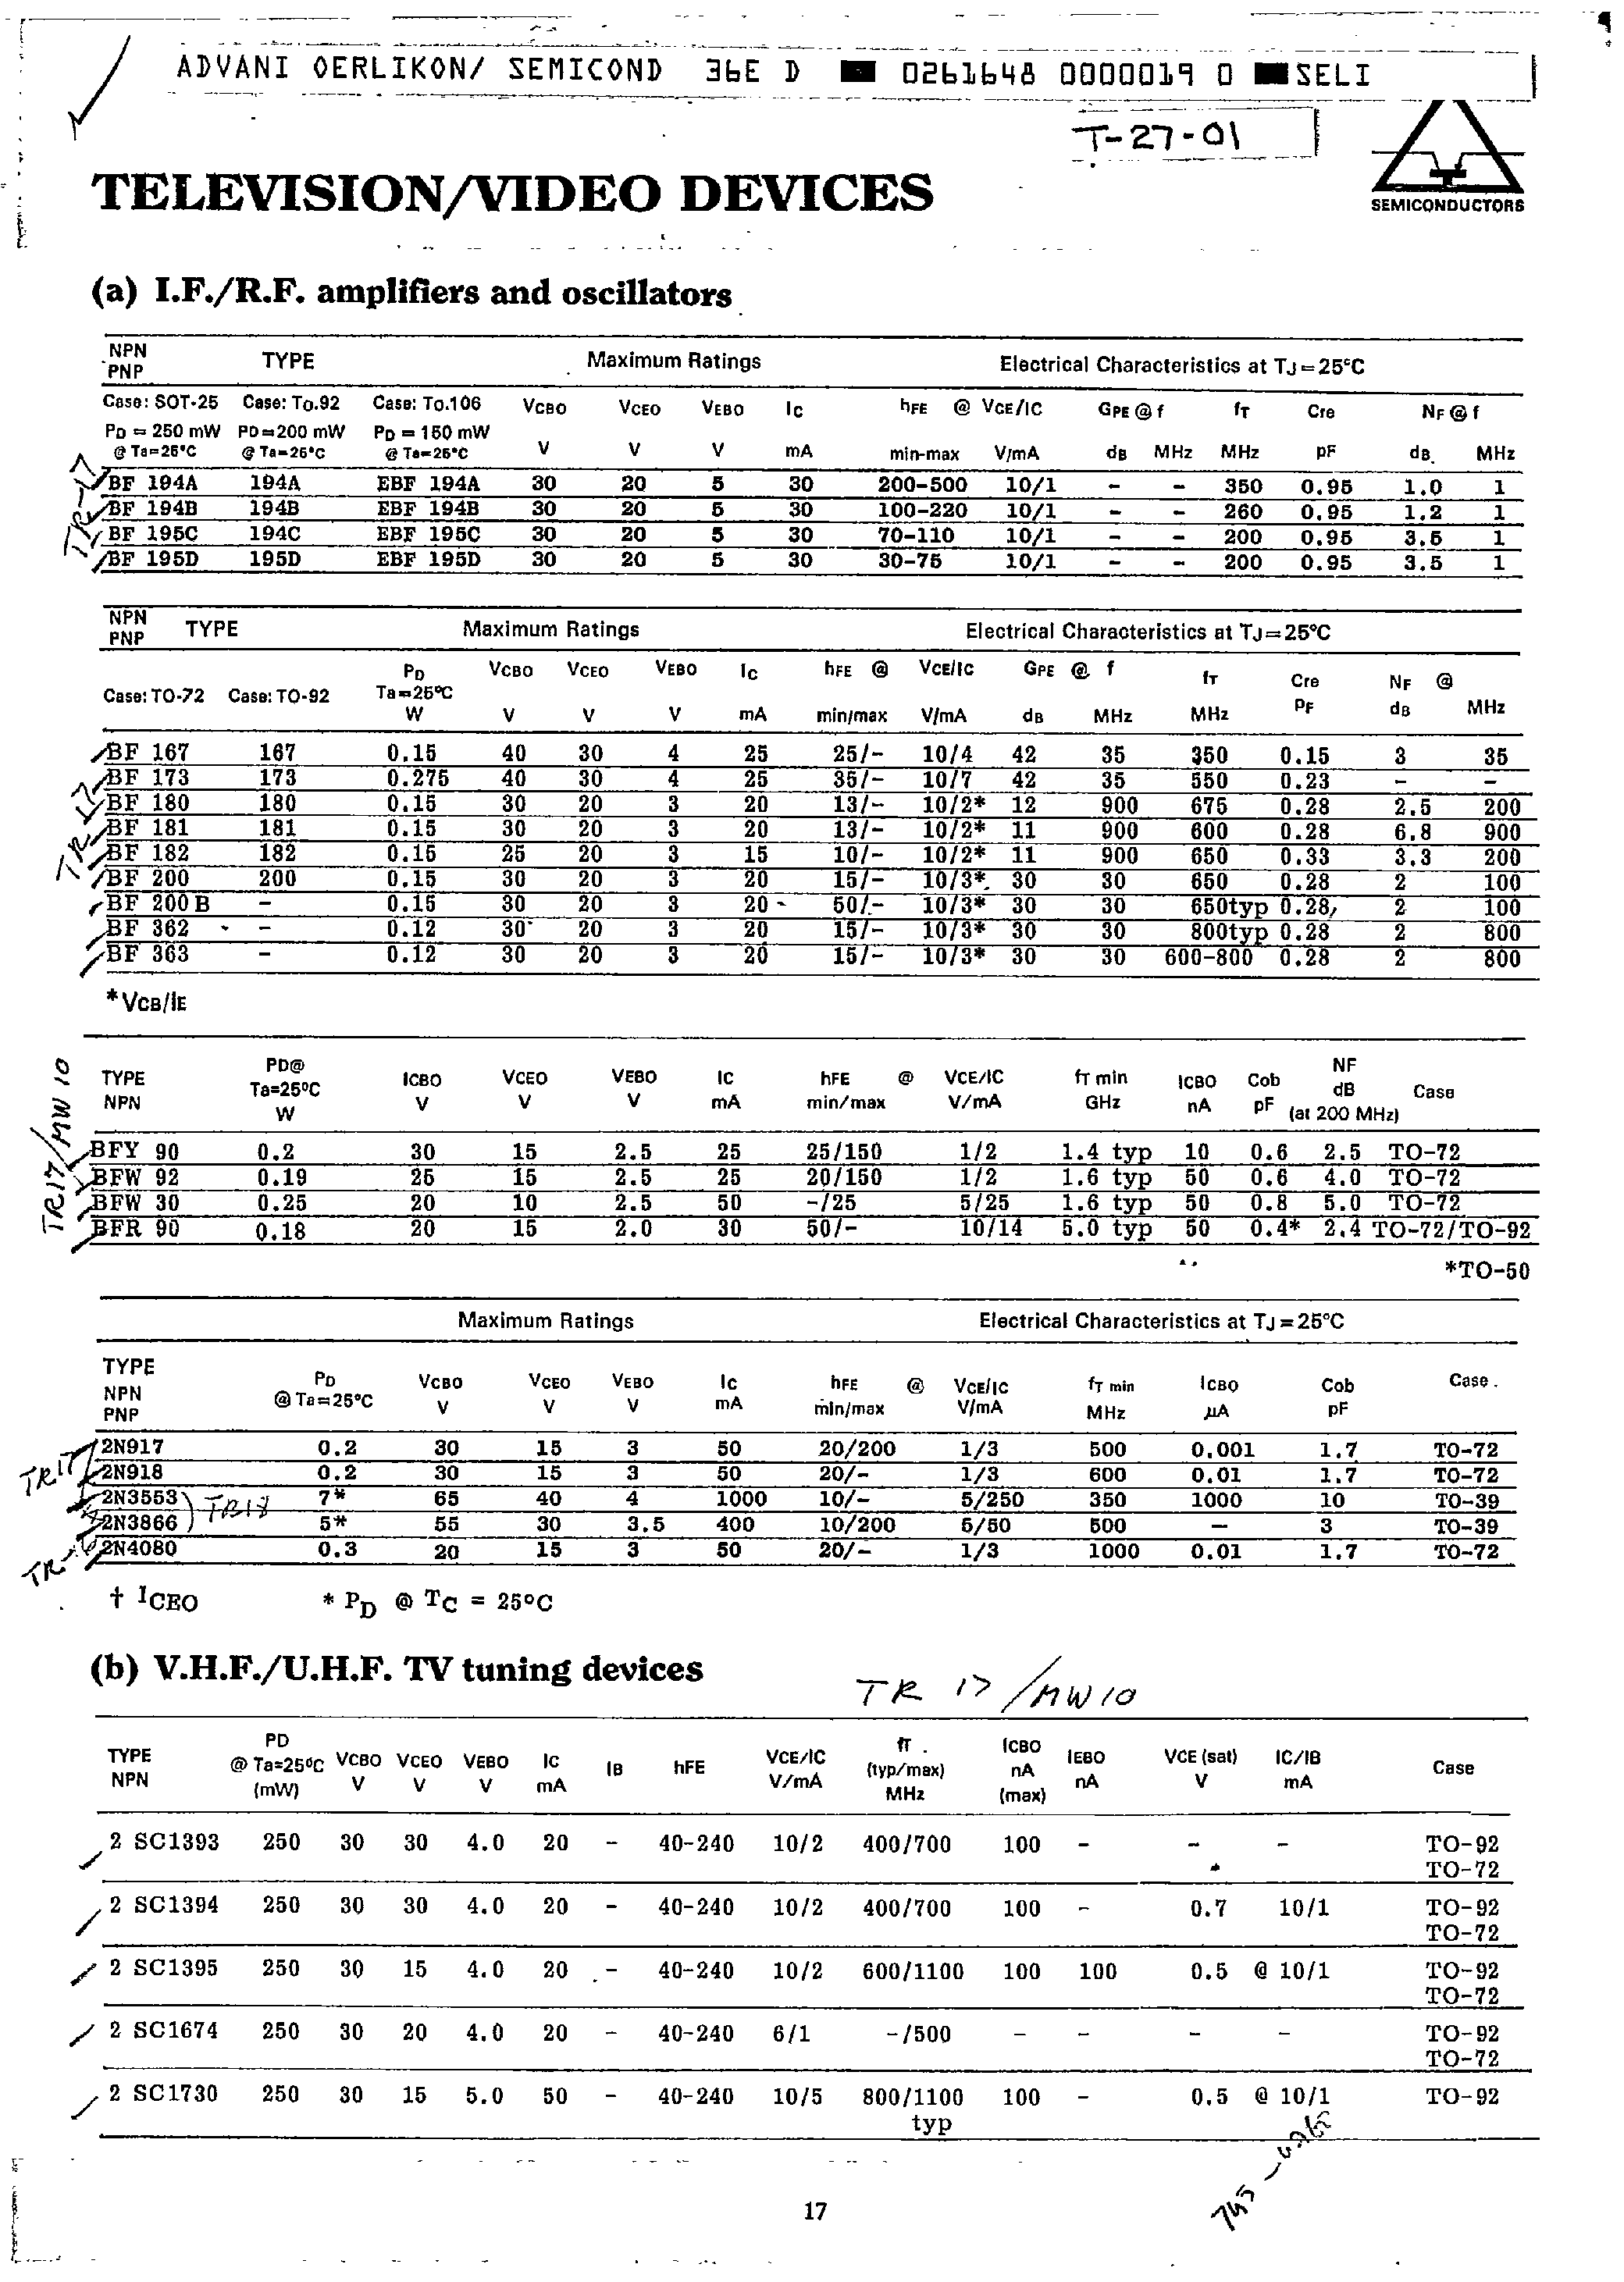 Datasheet BF195 - TV / Video Devices page 1